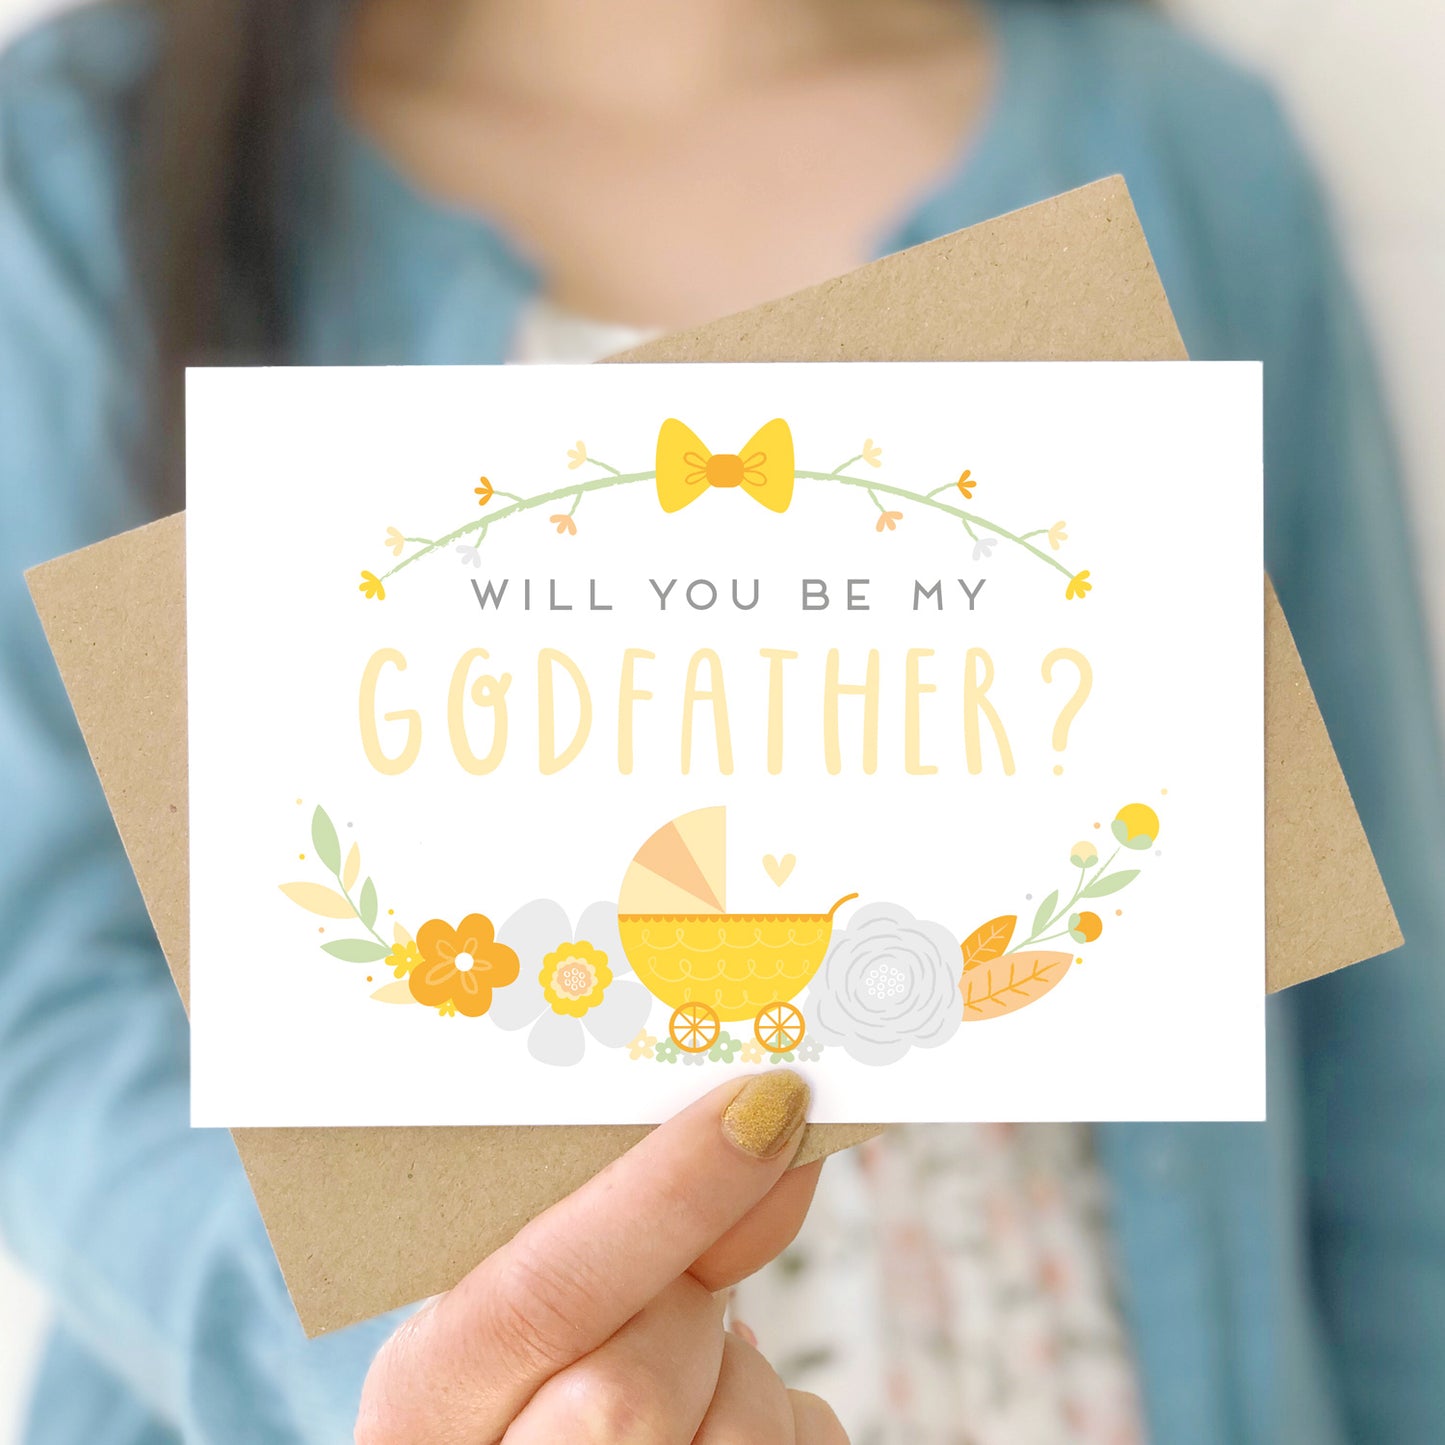 A will you be my godfather card being held in front of a white dress and blue cardigan. The design features a pram, simple florals and the all important question. This is the yellow palette.